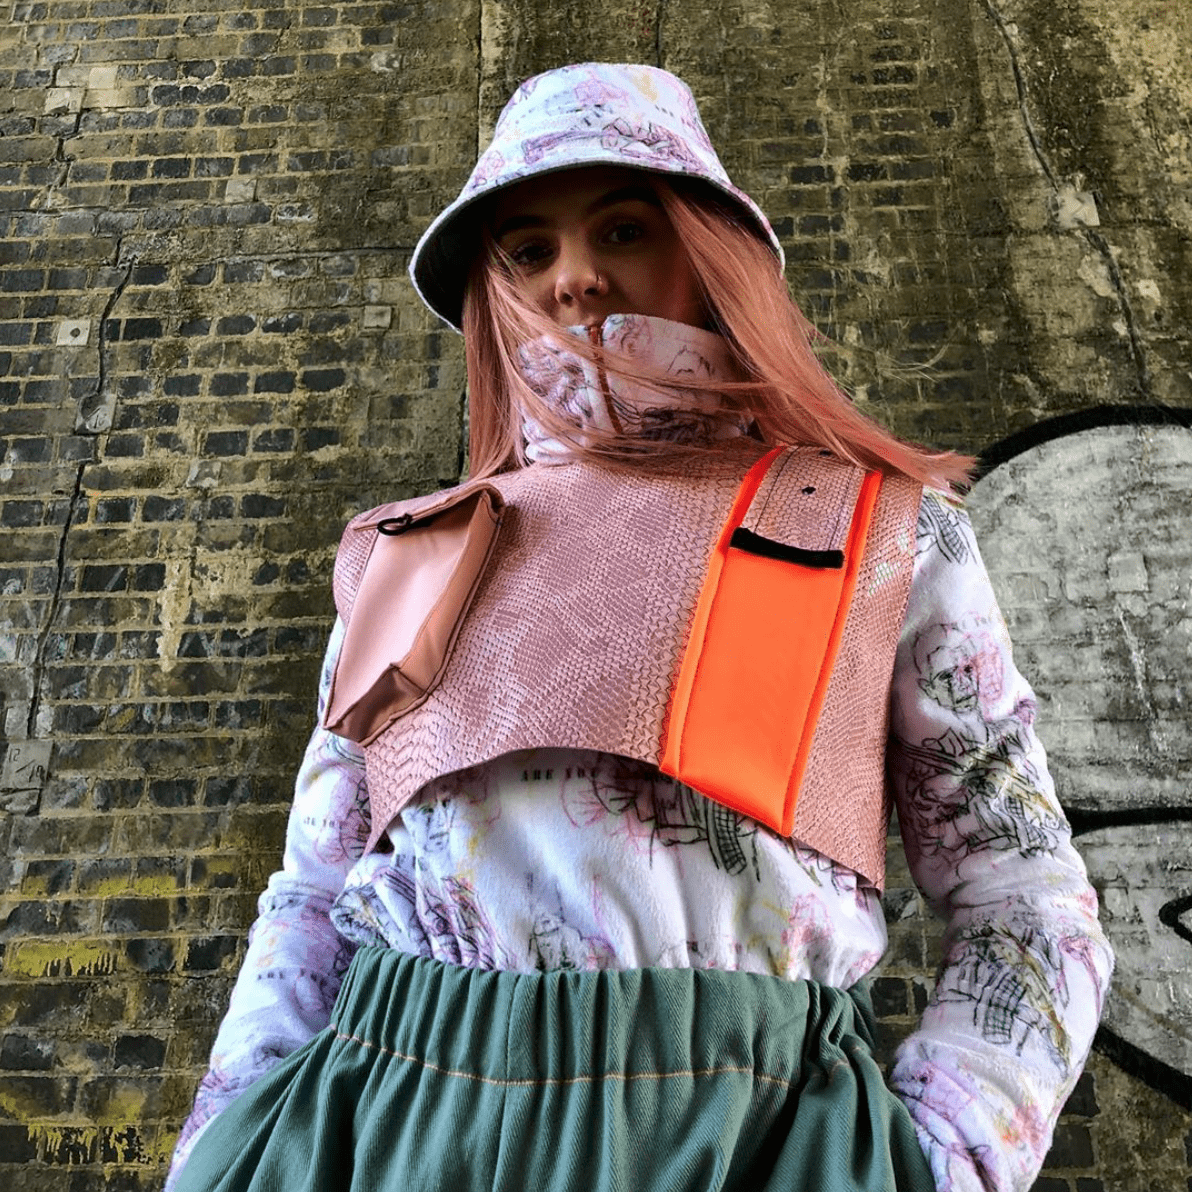 Model wearing a pink and white outfit standing next to a brick wall.